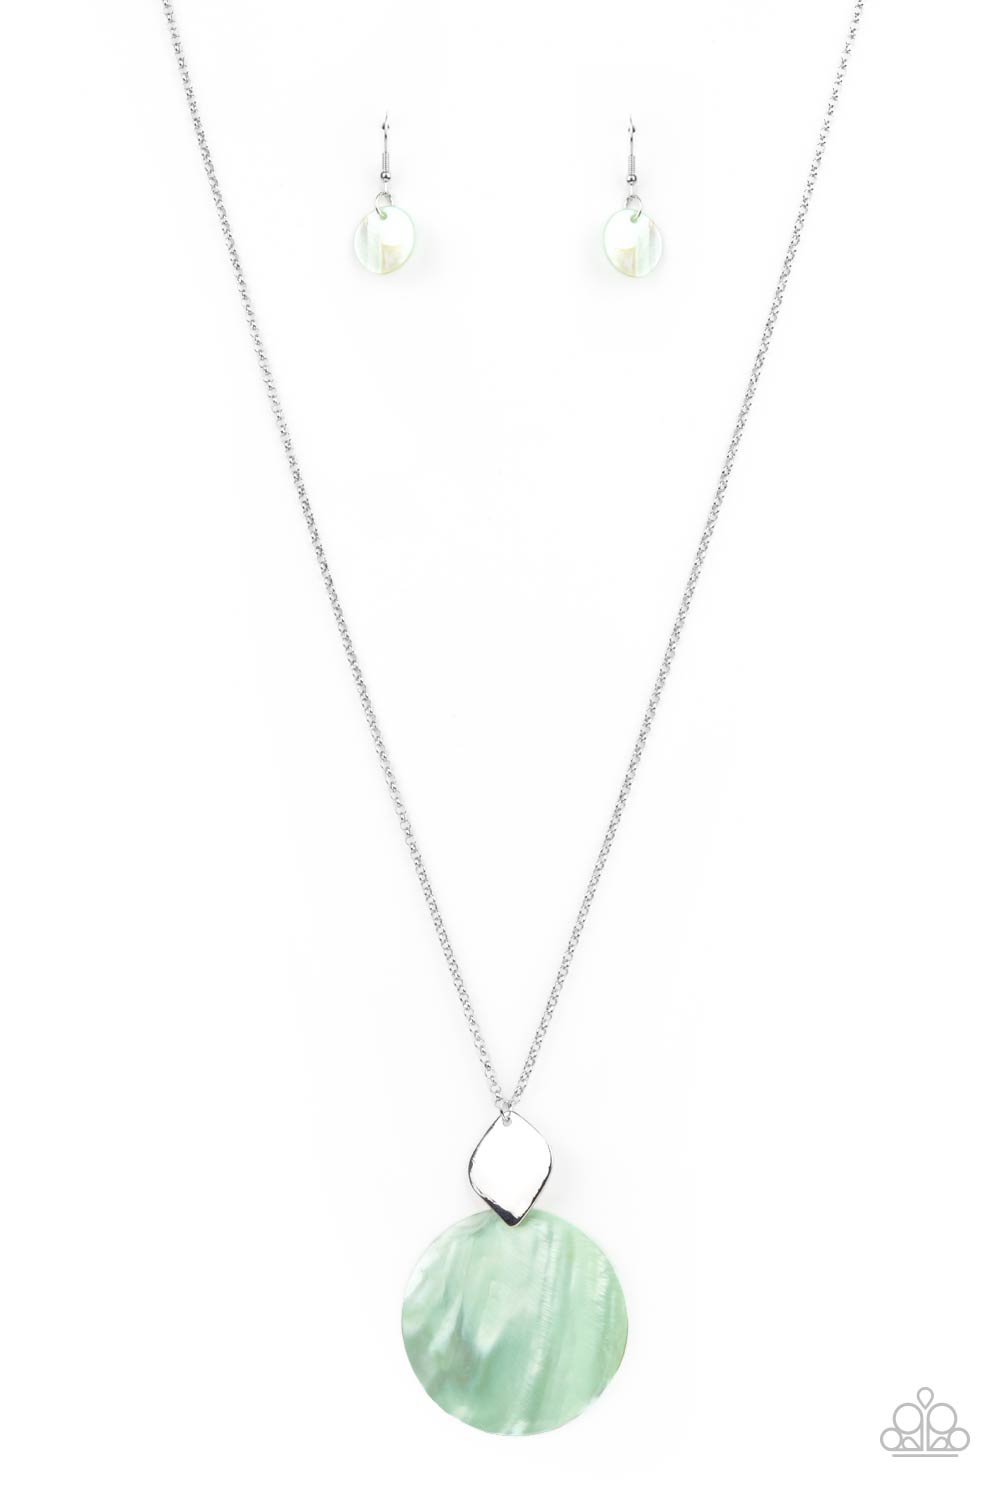 Tidal Tease - Green necklace